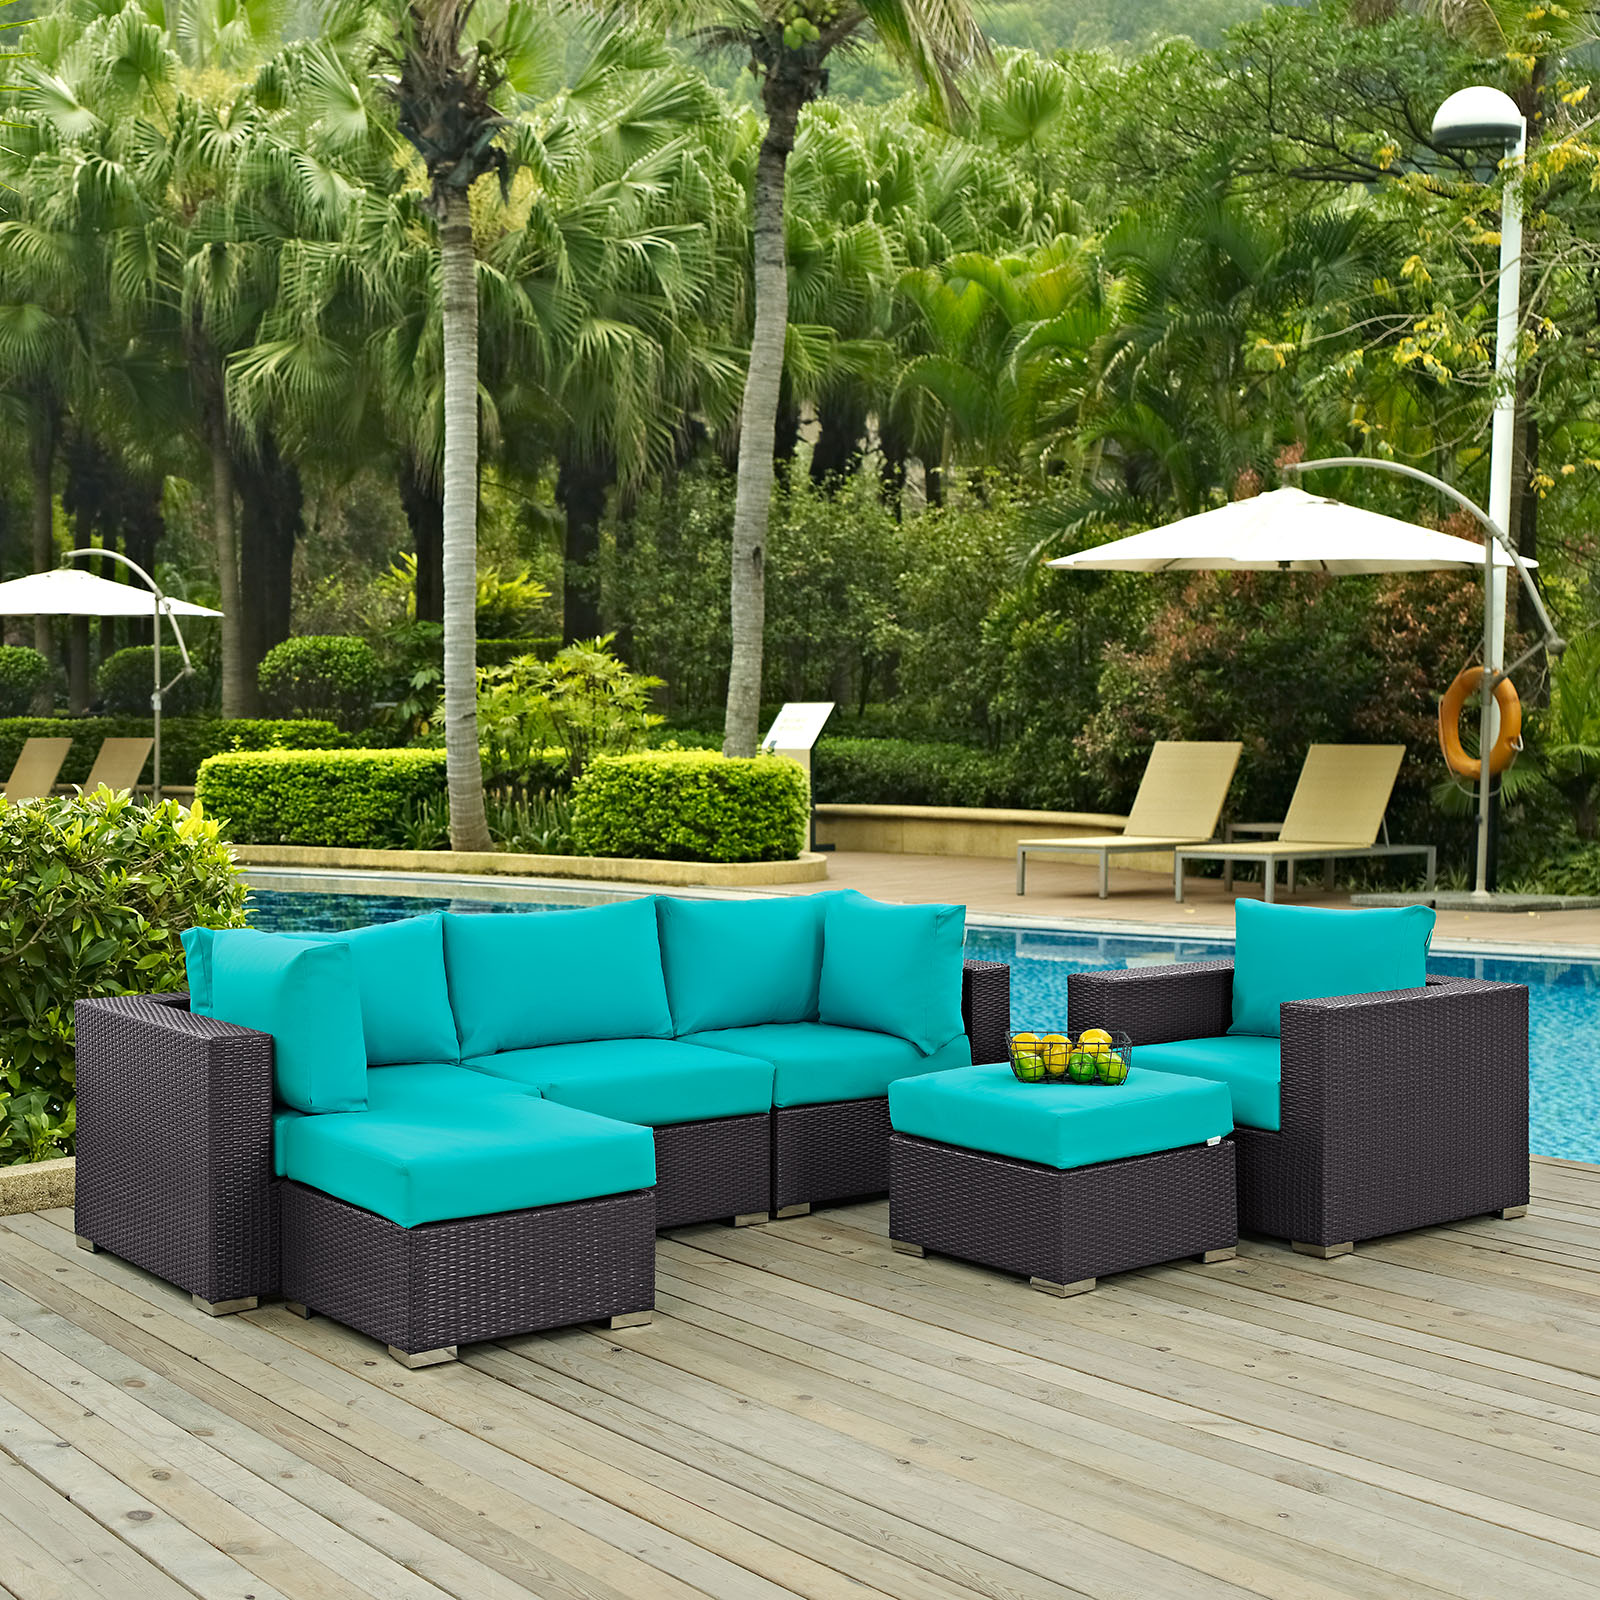 Modway Convene 6 Piece Outdoor Patio Sectional Set in Espresso Turquoise - image 1 of 8